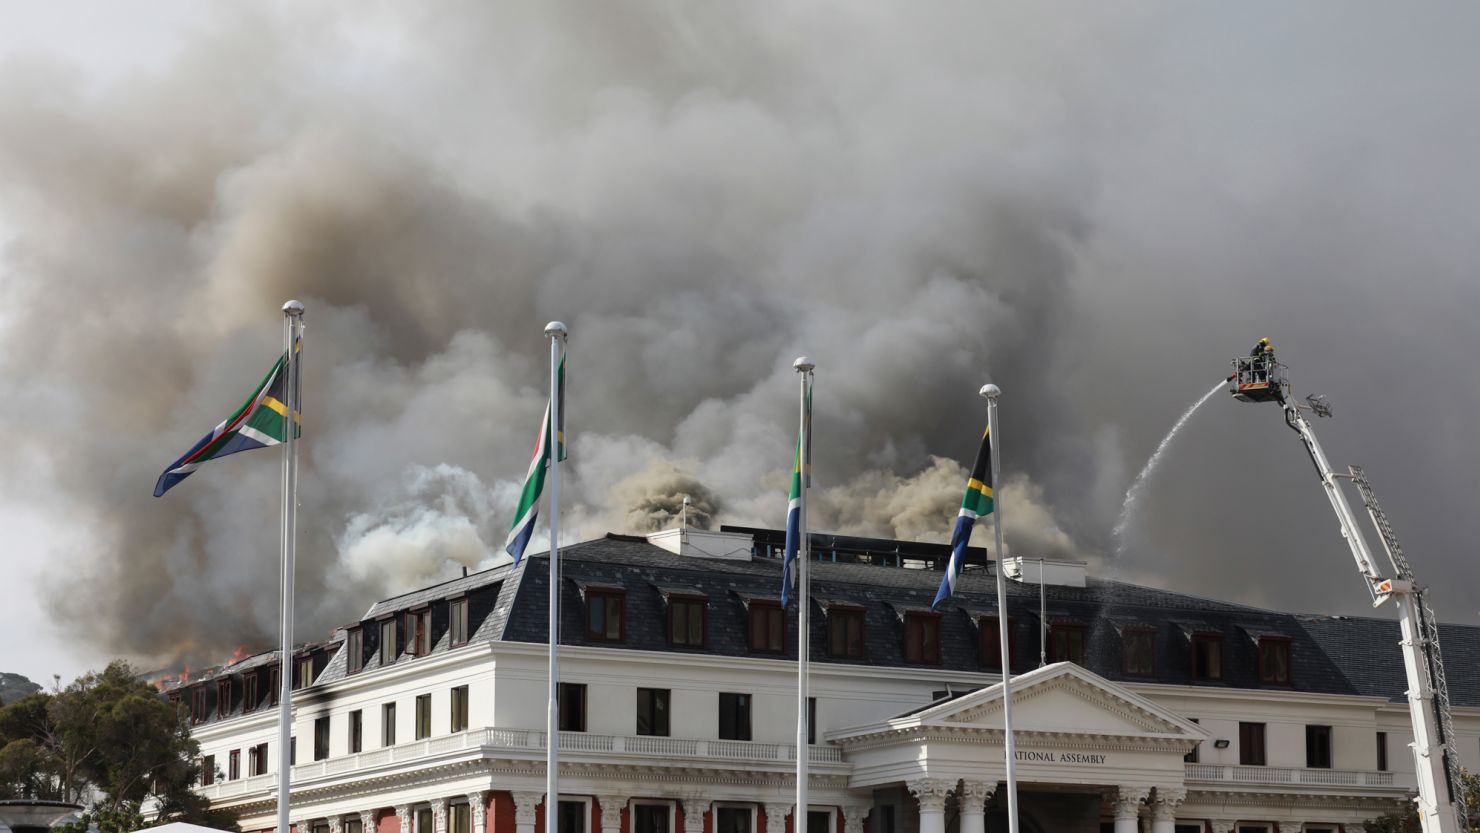 Smoke rises from the Parliament in Cape Town, South Africa, Monday, Jan 3, 2022 after the fire re-ignited late afternoon. 